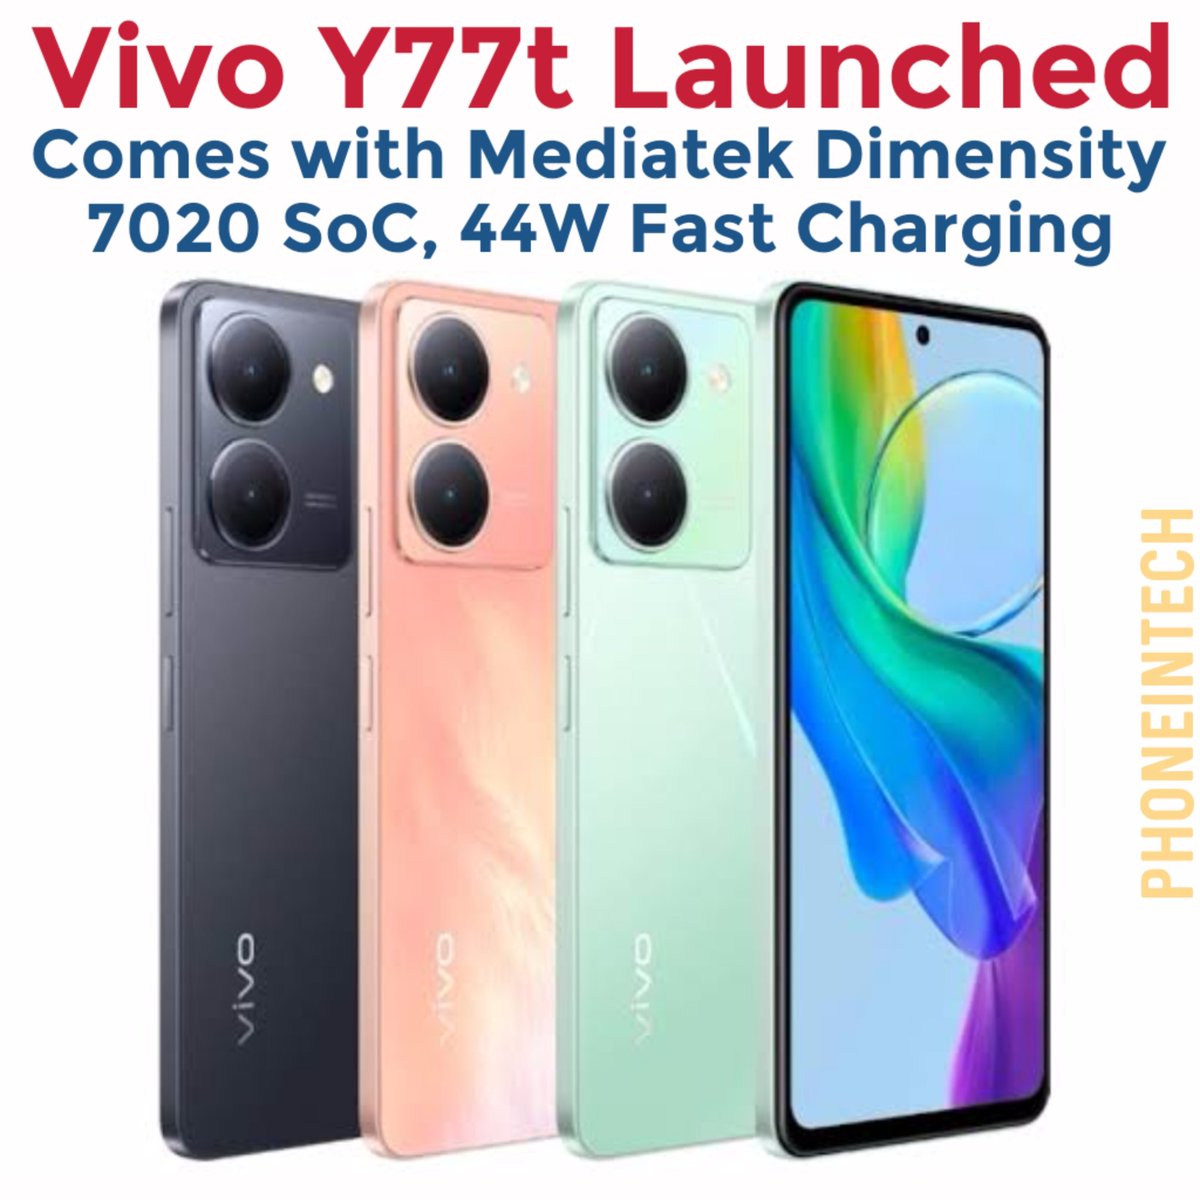 Vivo Y77t launched in China along with Y77, Y77e and Y77e (t1) models. Vivo Y77t is powered by Mediatek Dimensity 7020 SoC and comes with a 5000mAh battery which supports 44W fast charging. It features a 6.64 inch Full HD+ 120Hz display and runs on Android 13.

#vivoy77t